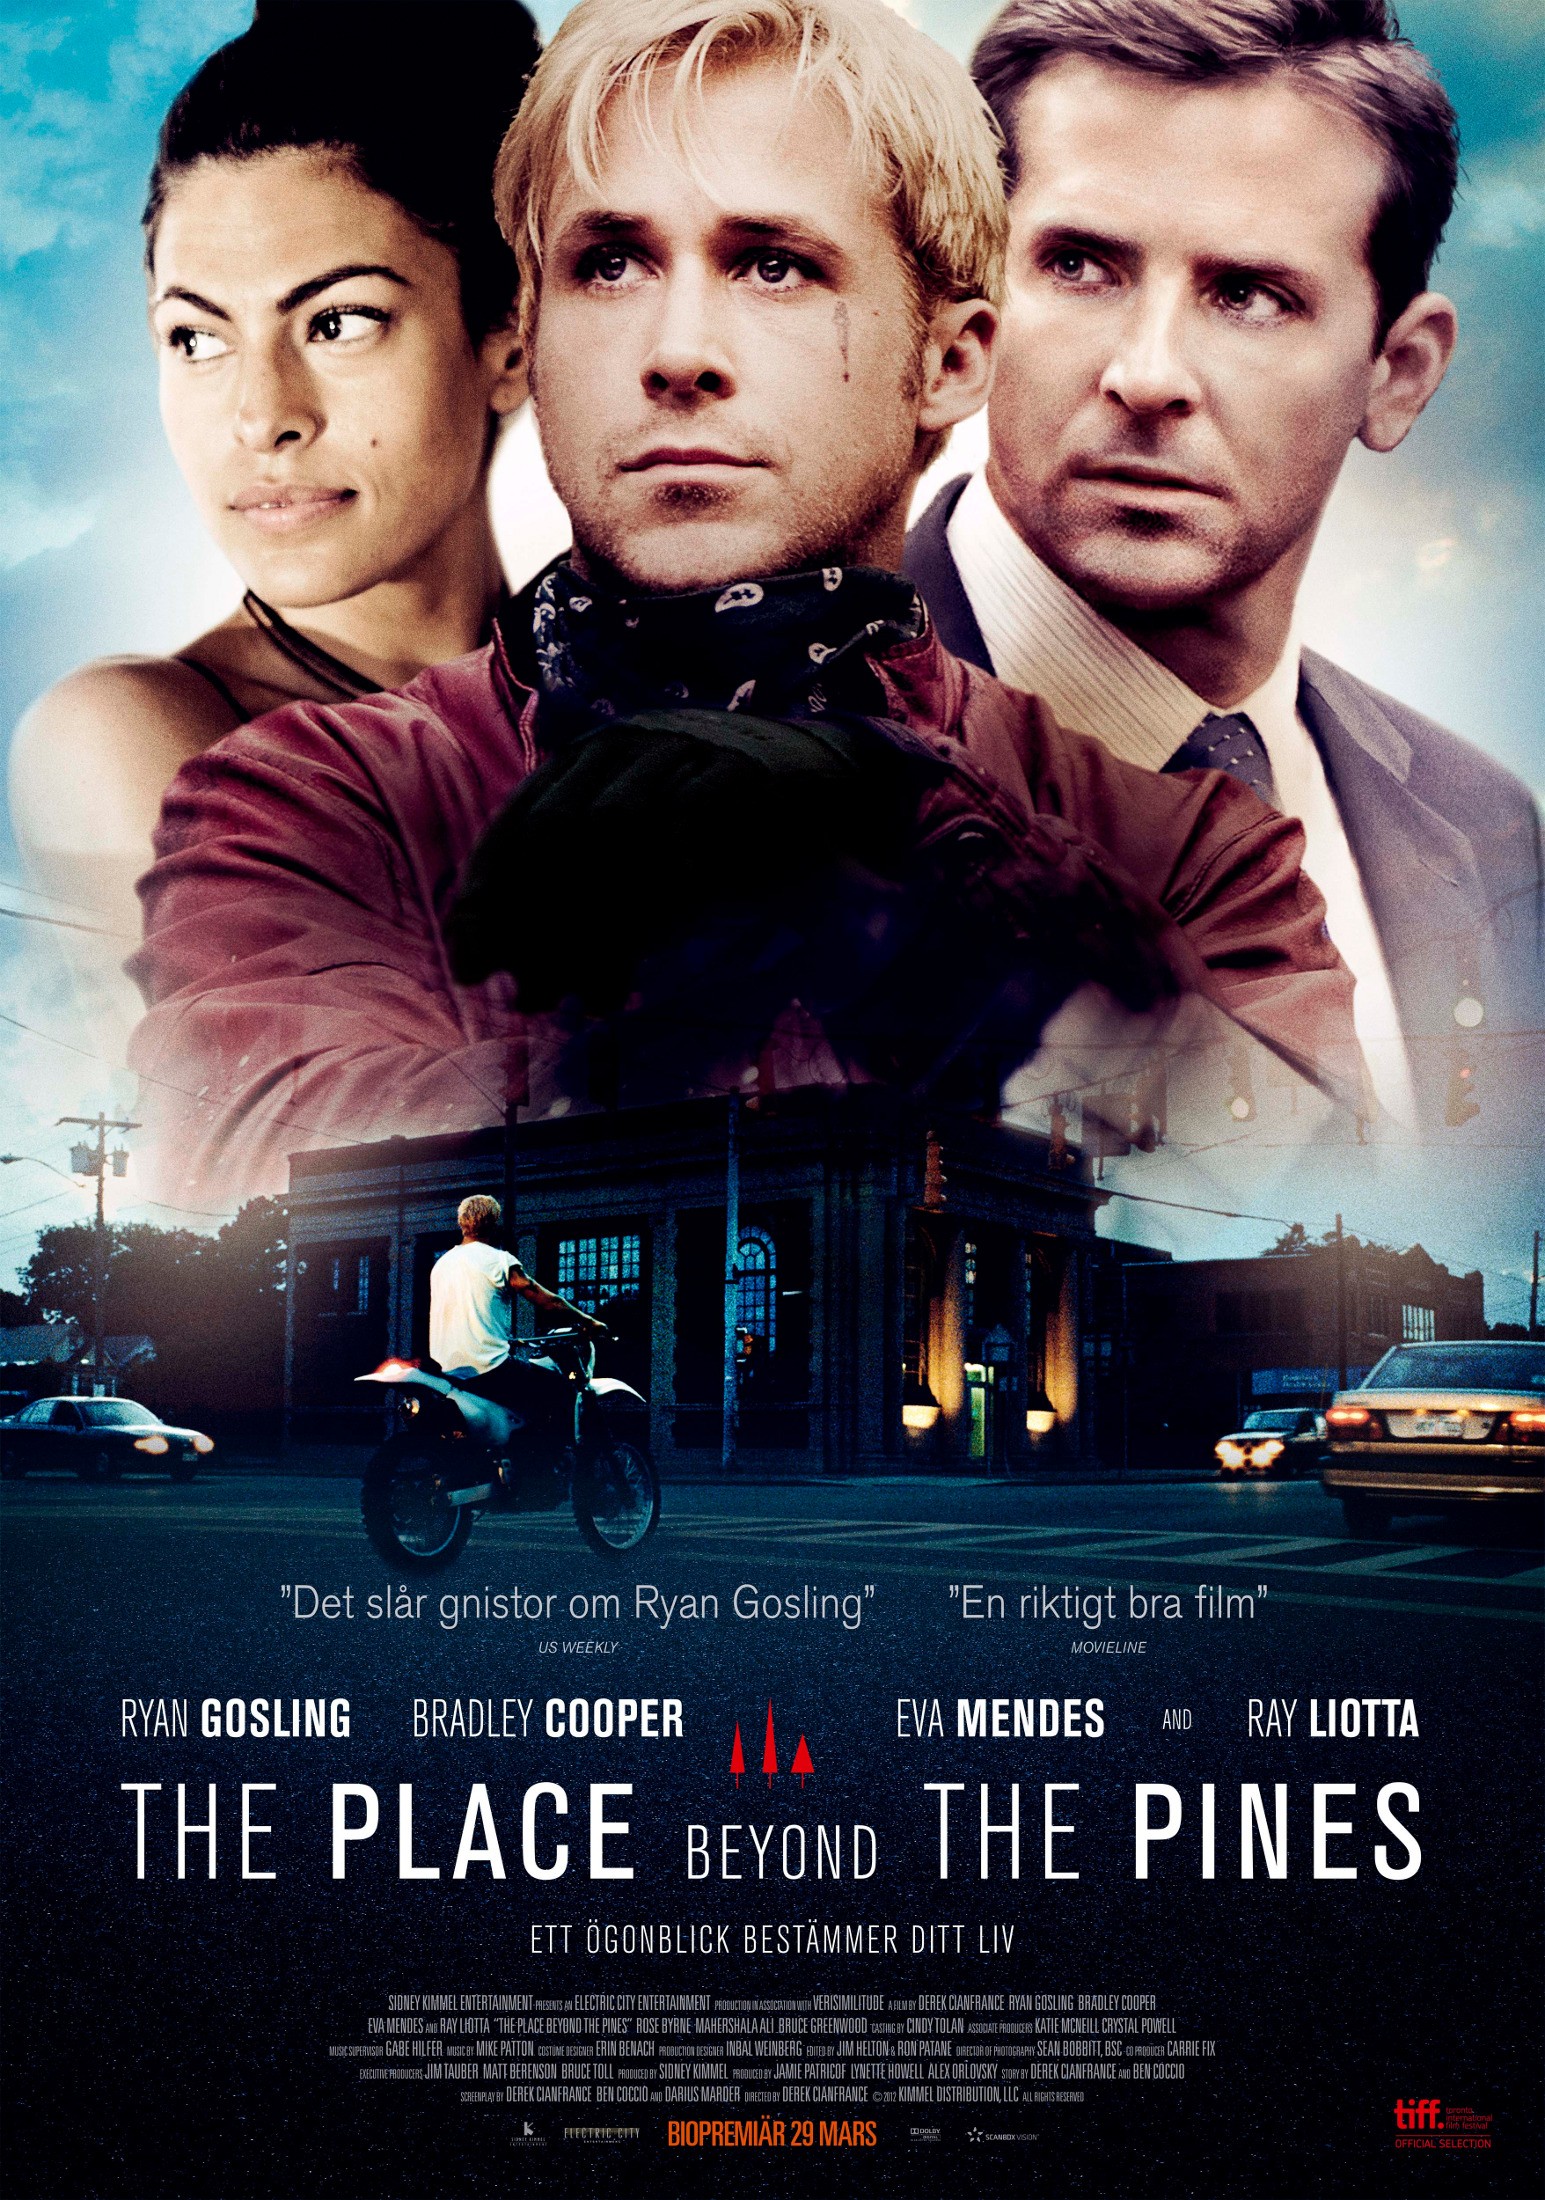 [Thriller/Drame] The Place Beyond the Pines : Base de données des films - Where To Watch The Place Beyond The Pines